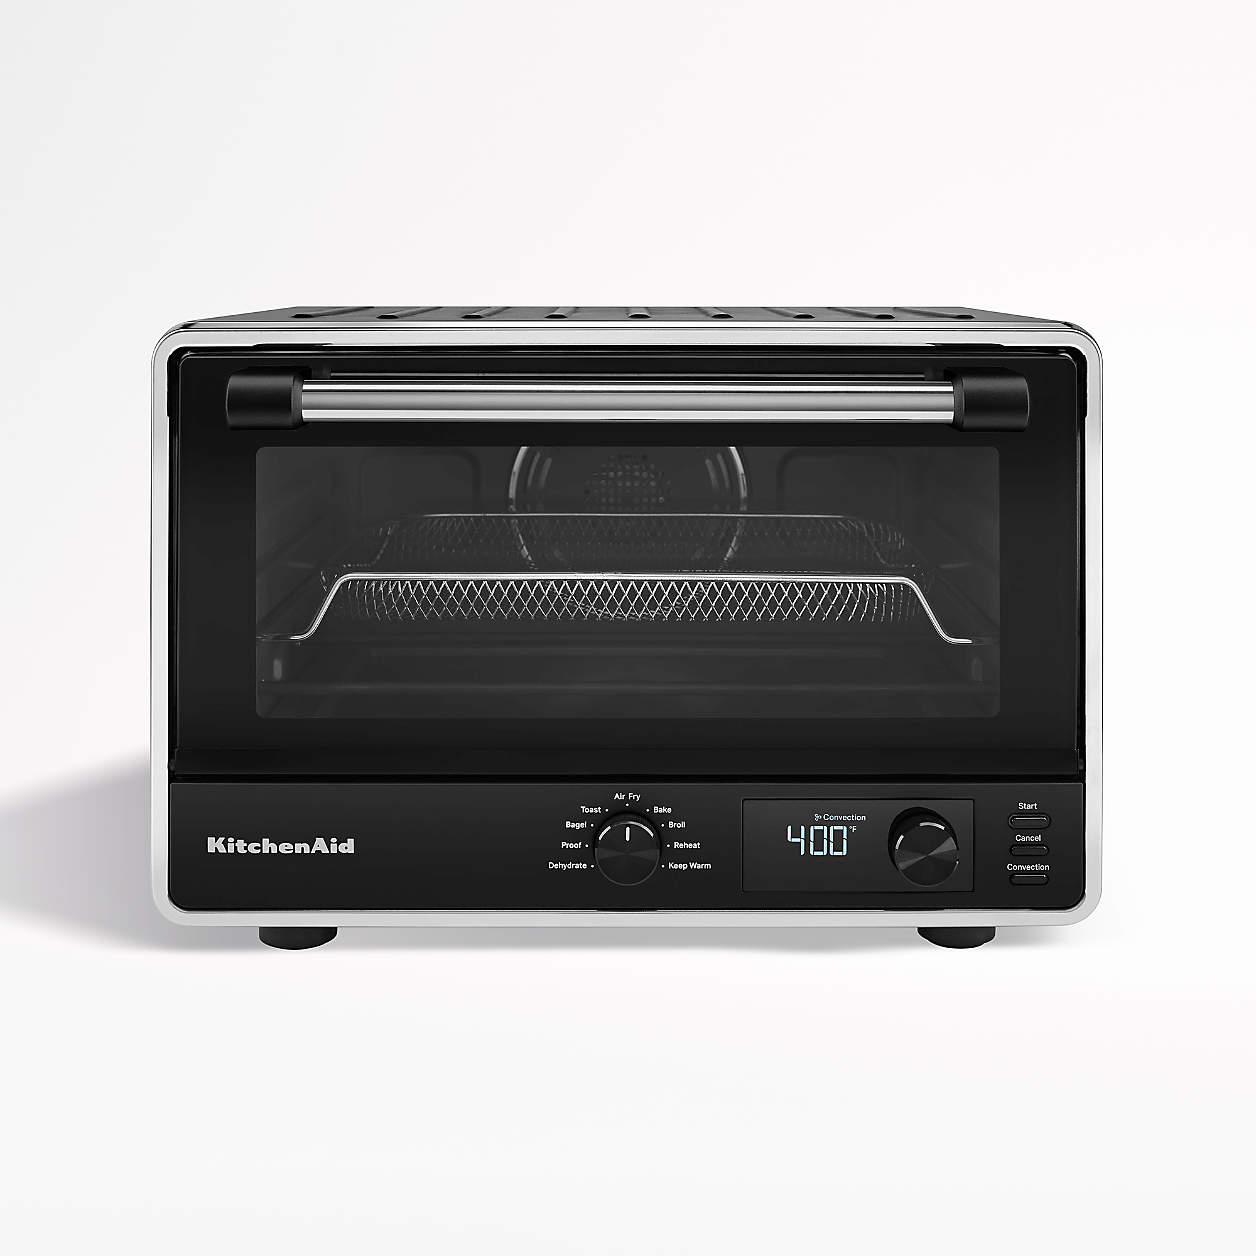 KitchenAid Toaster Oven Air Fryer + Reviews